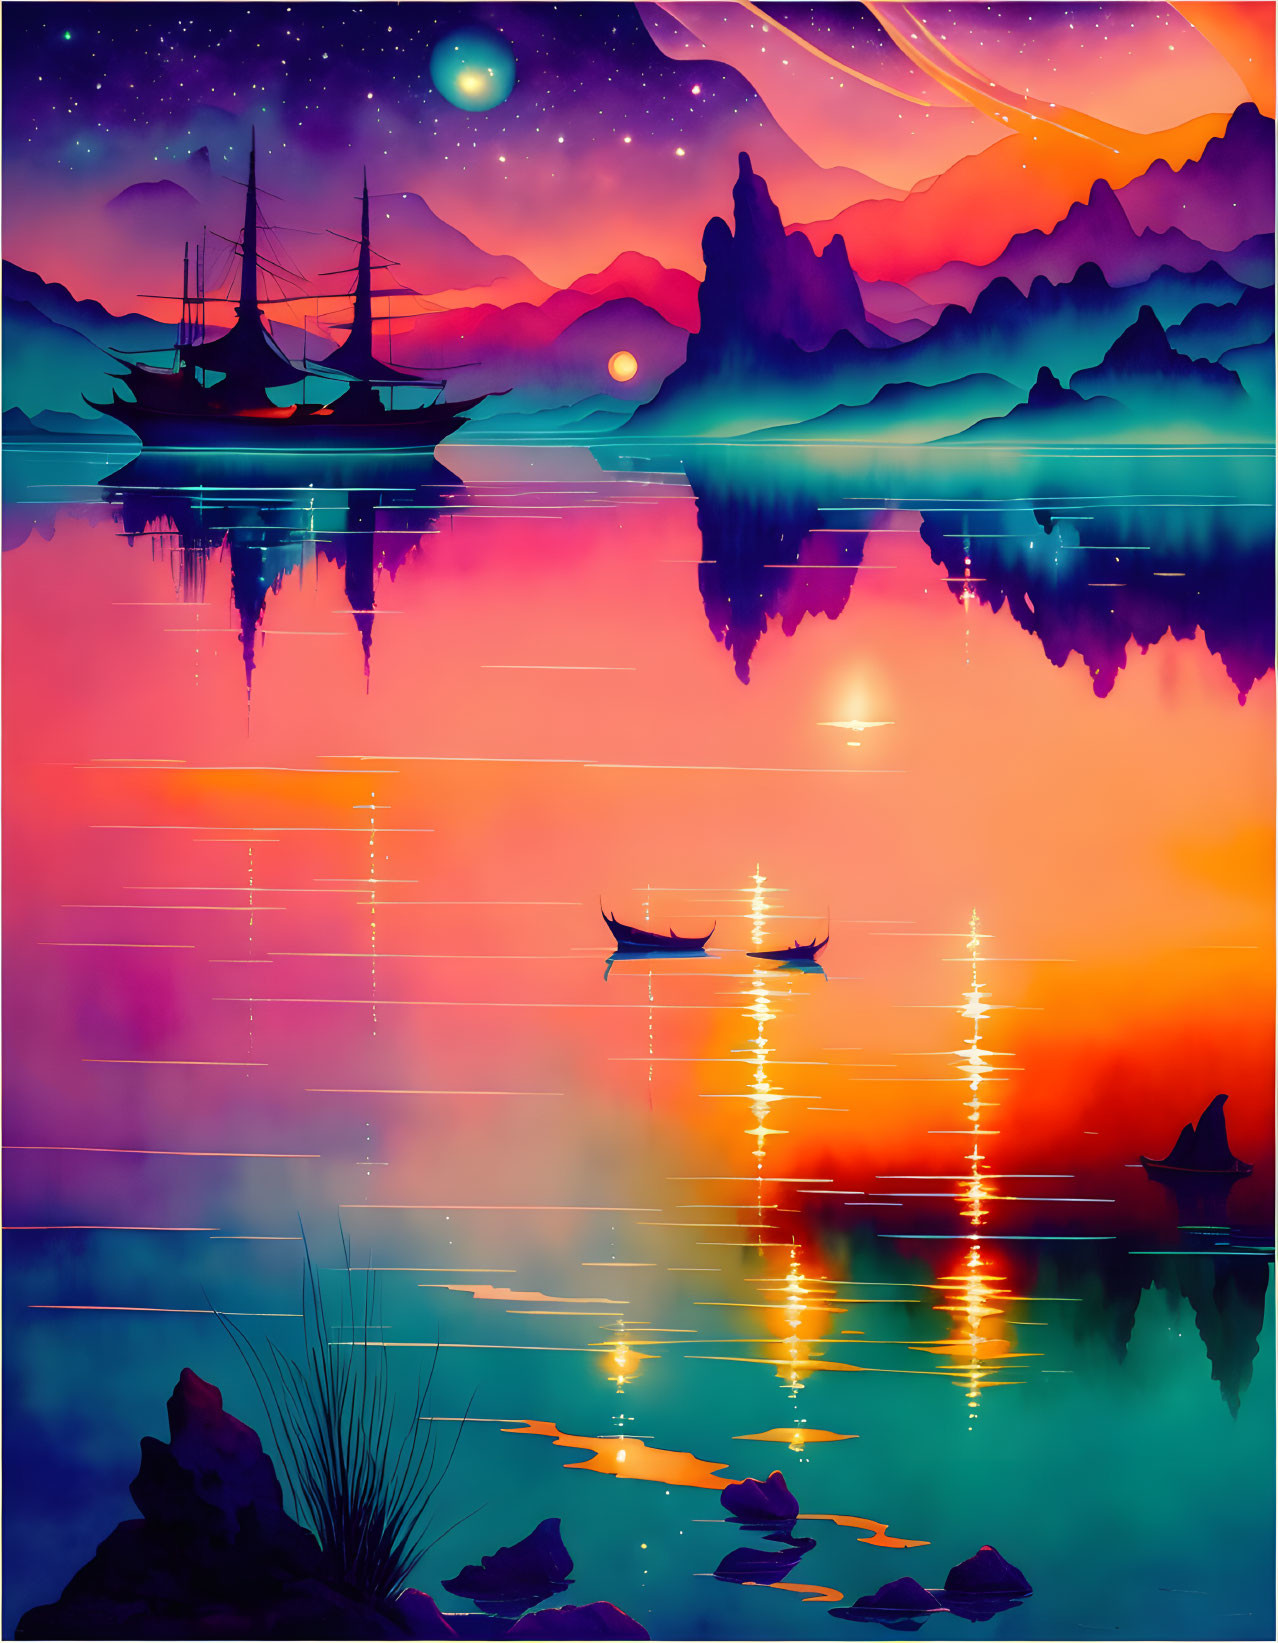 Serene Landscape with a ship